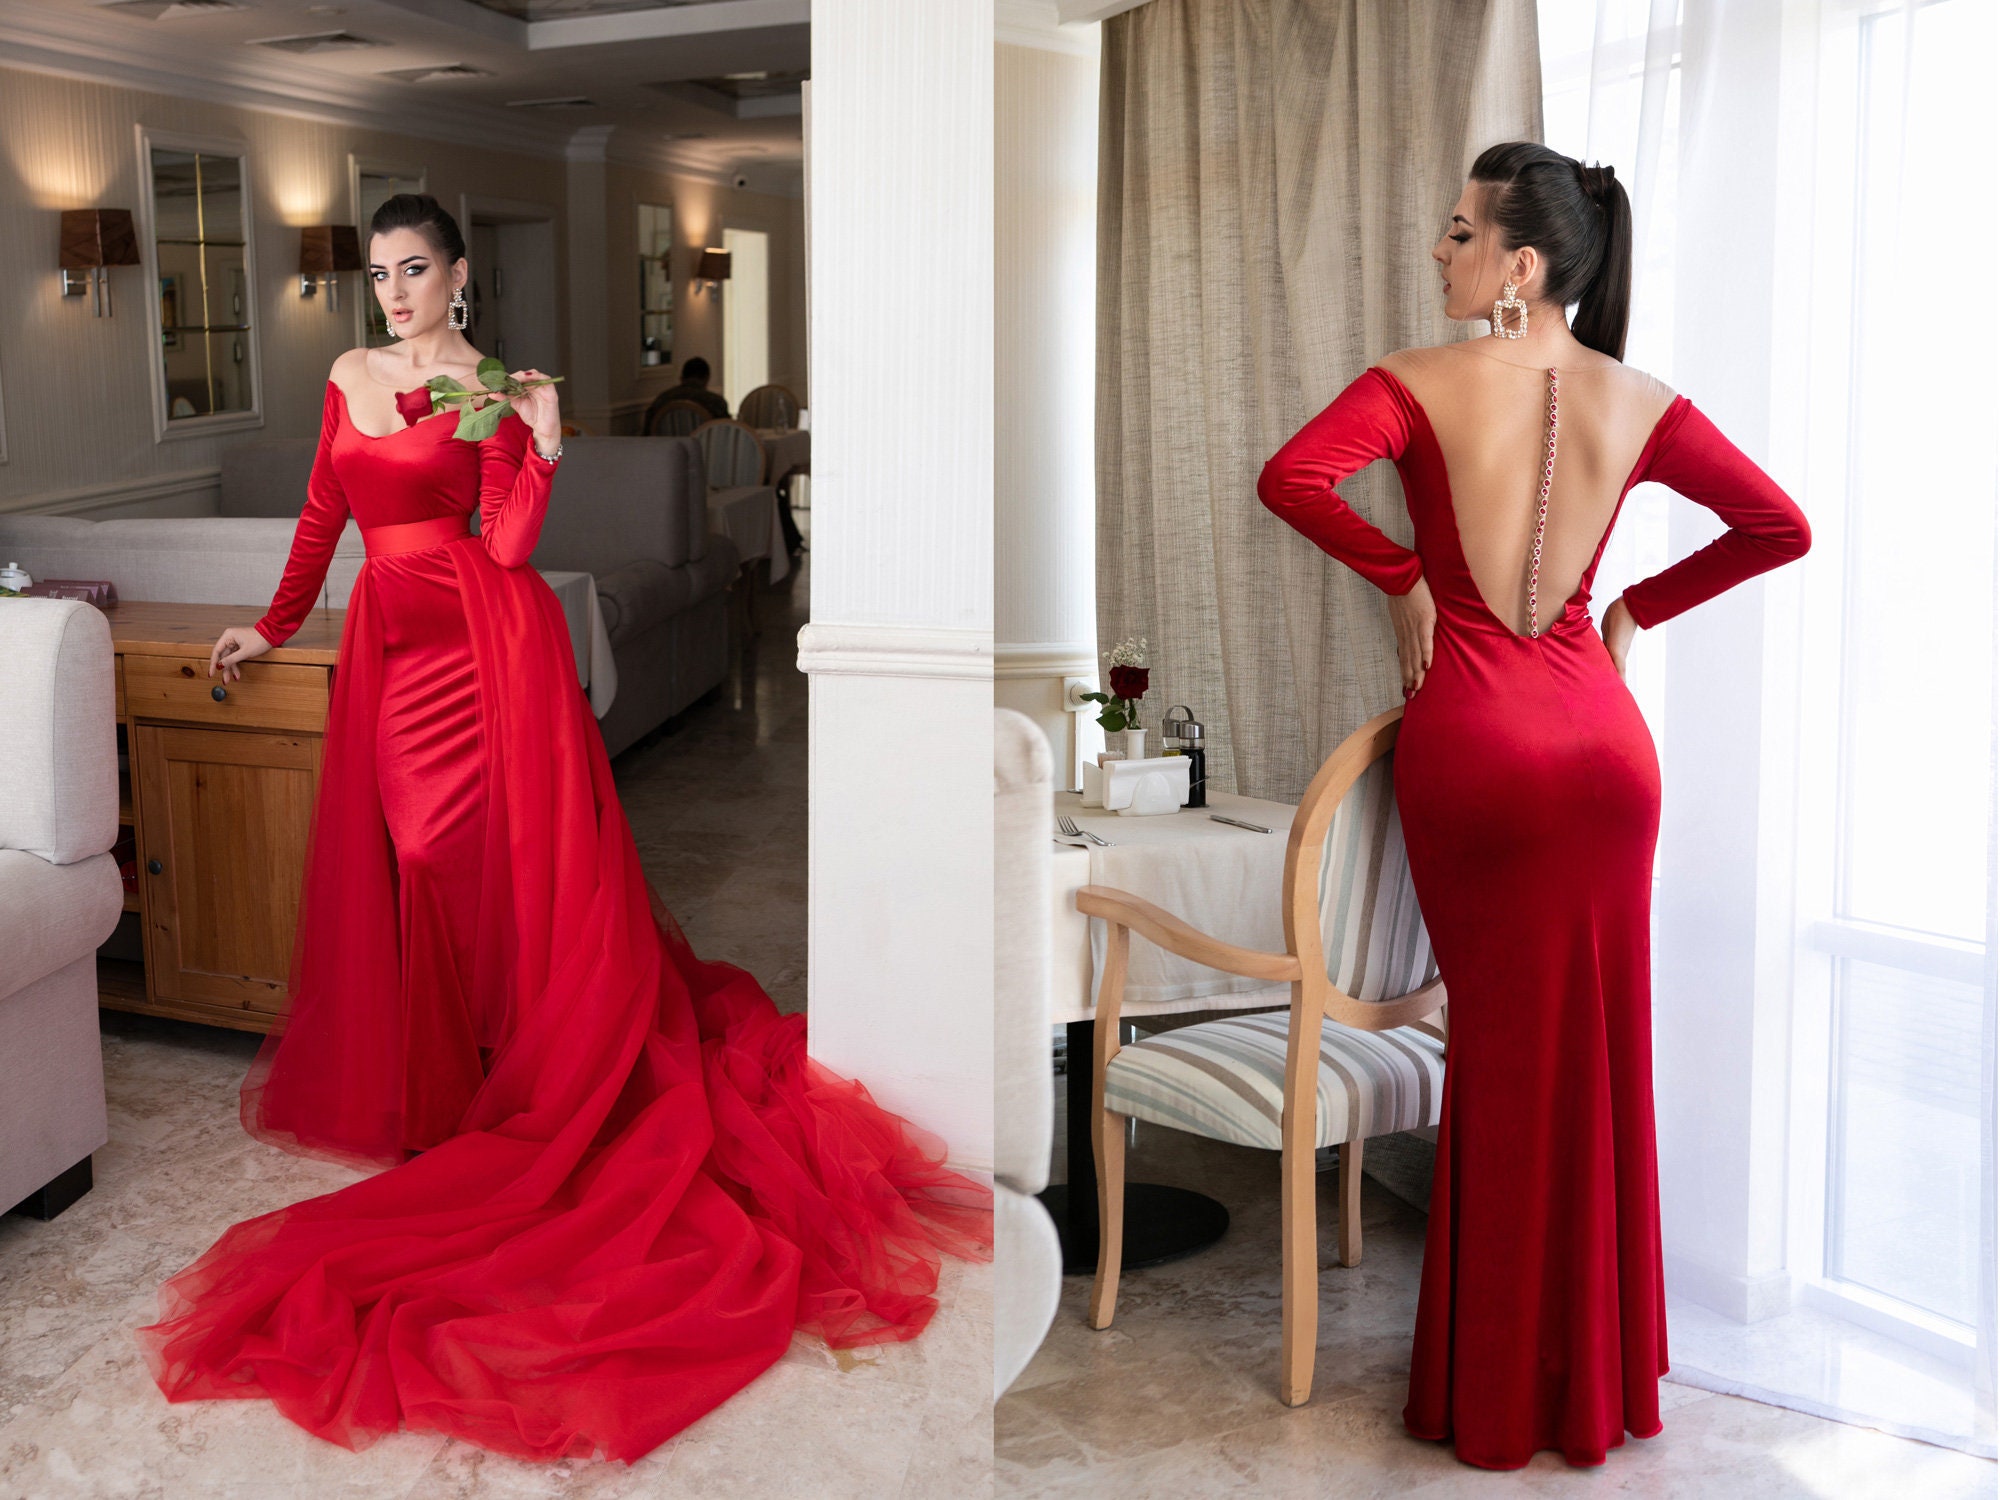 Sexy Red Mermaid Strapless Long Evening Prom Dress with Slit | LizProm